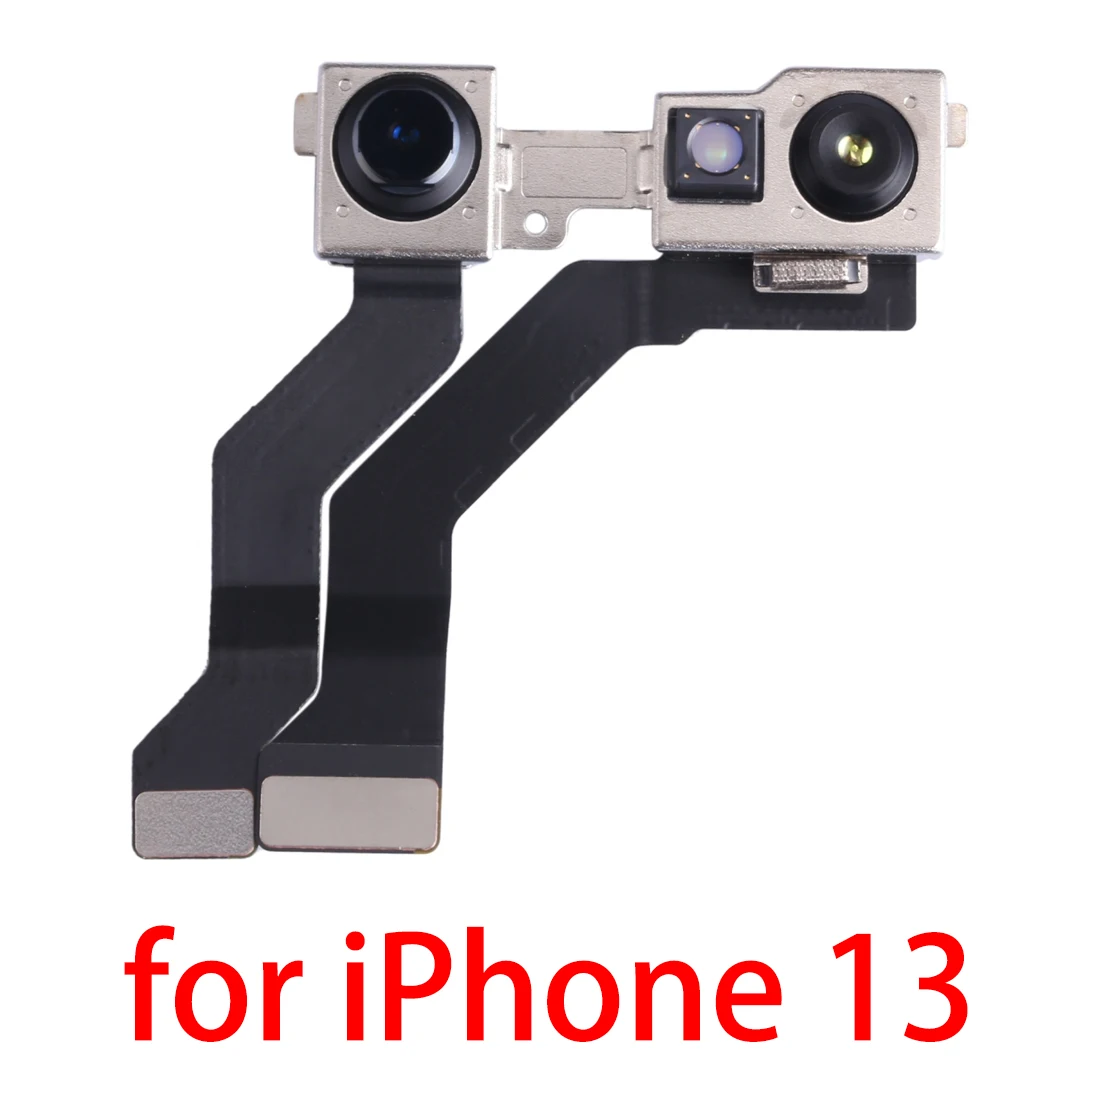 New for iPhone 13 Front Facing Camera for iPhone 13